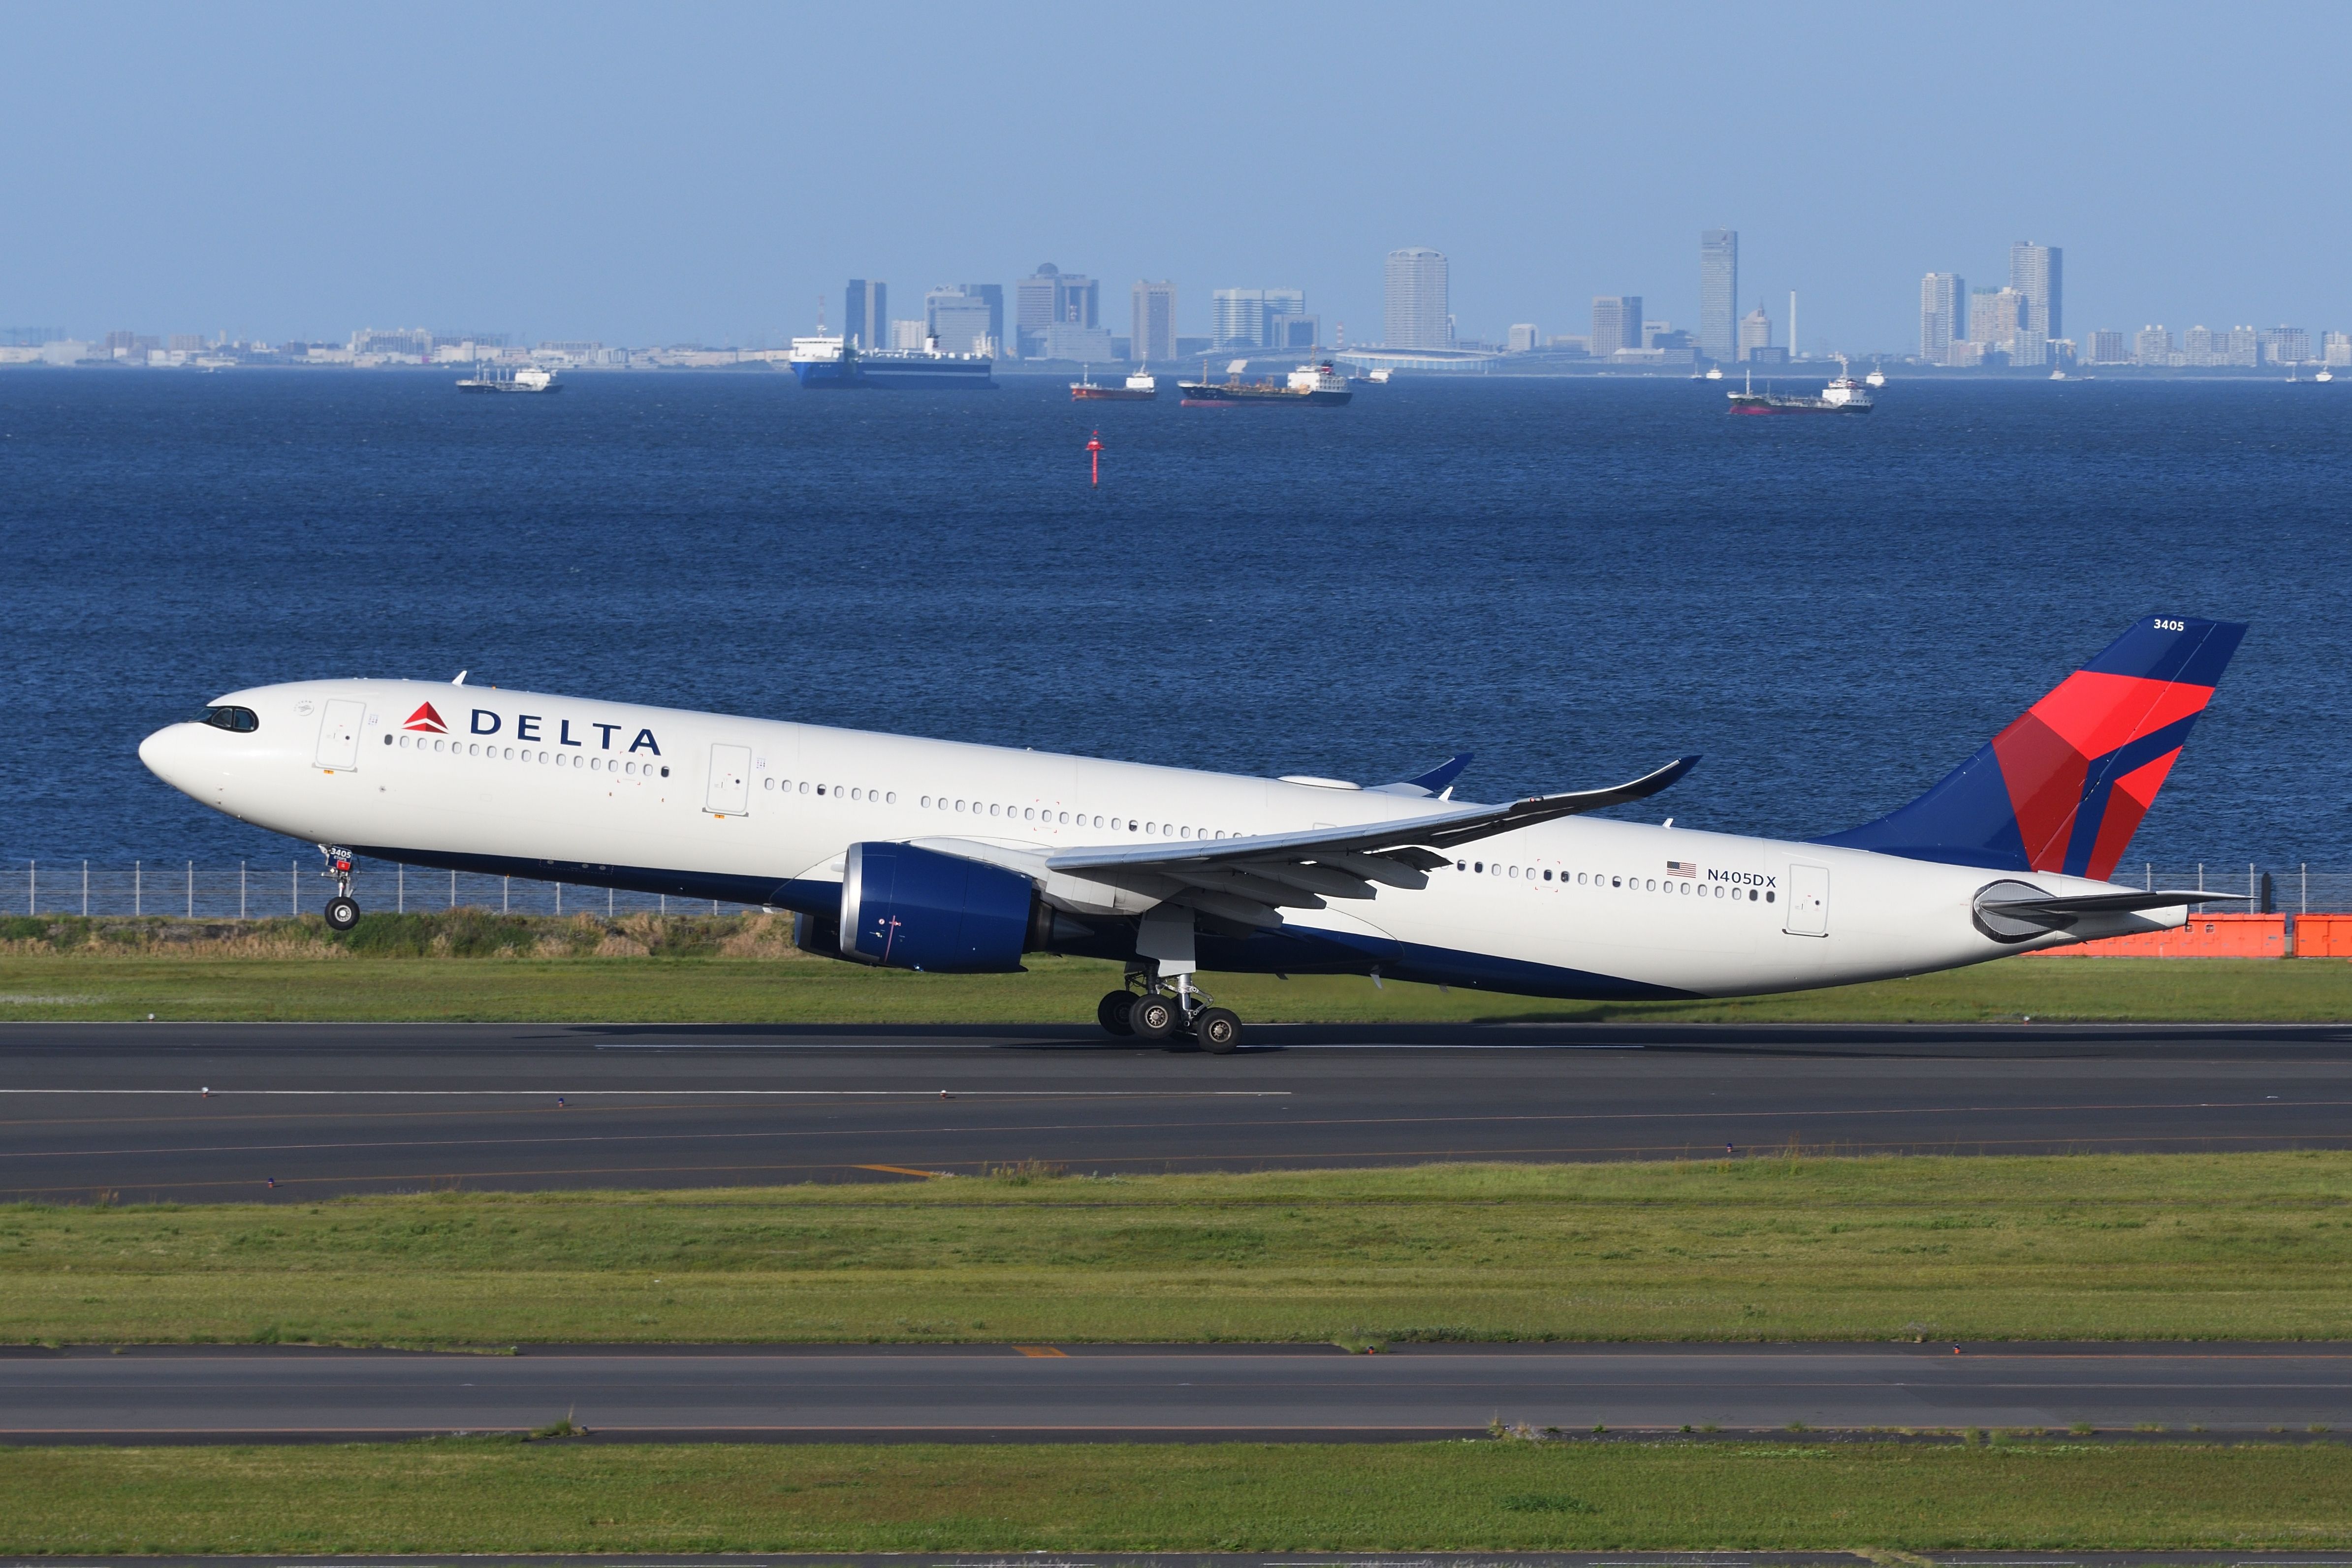 Delta Air Lines Airbus A330neo landing